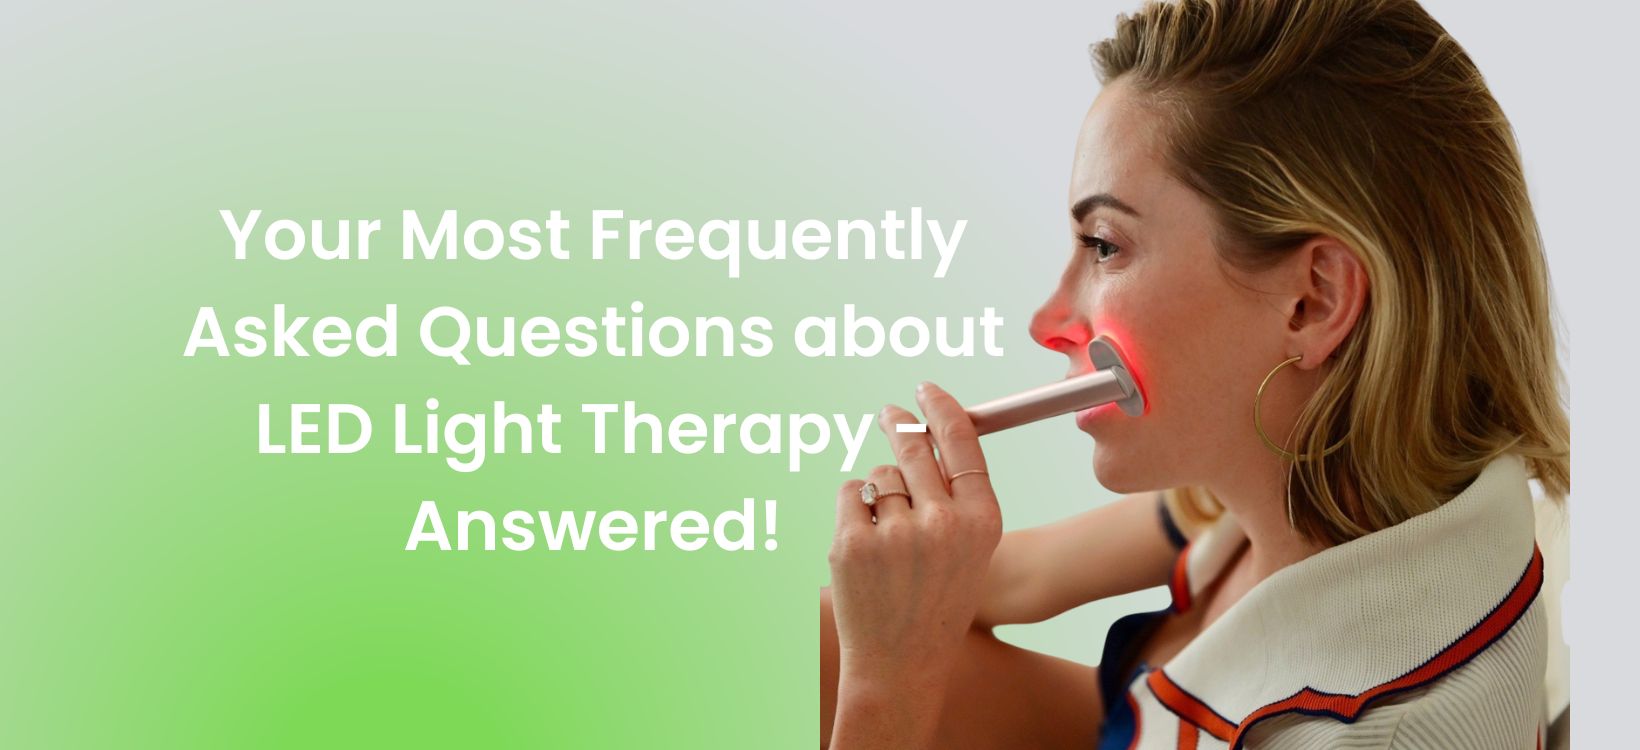 Your Most Frequently Asked Questions about LED Light Therapy - Answered!